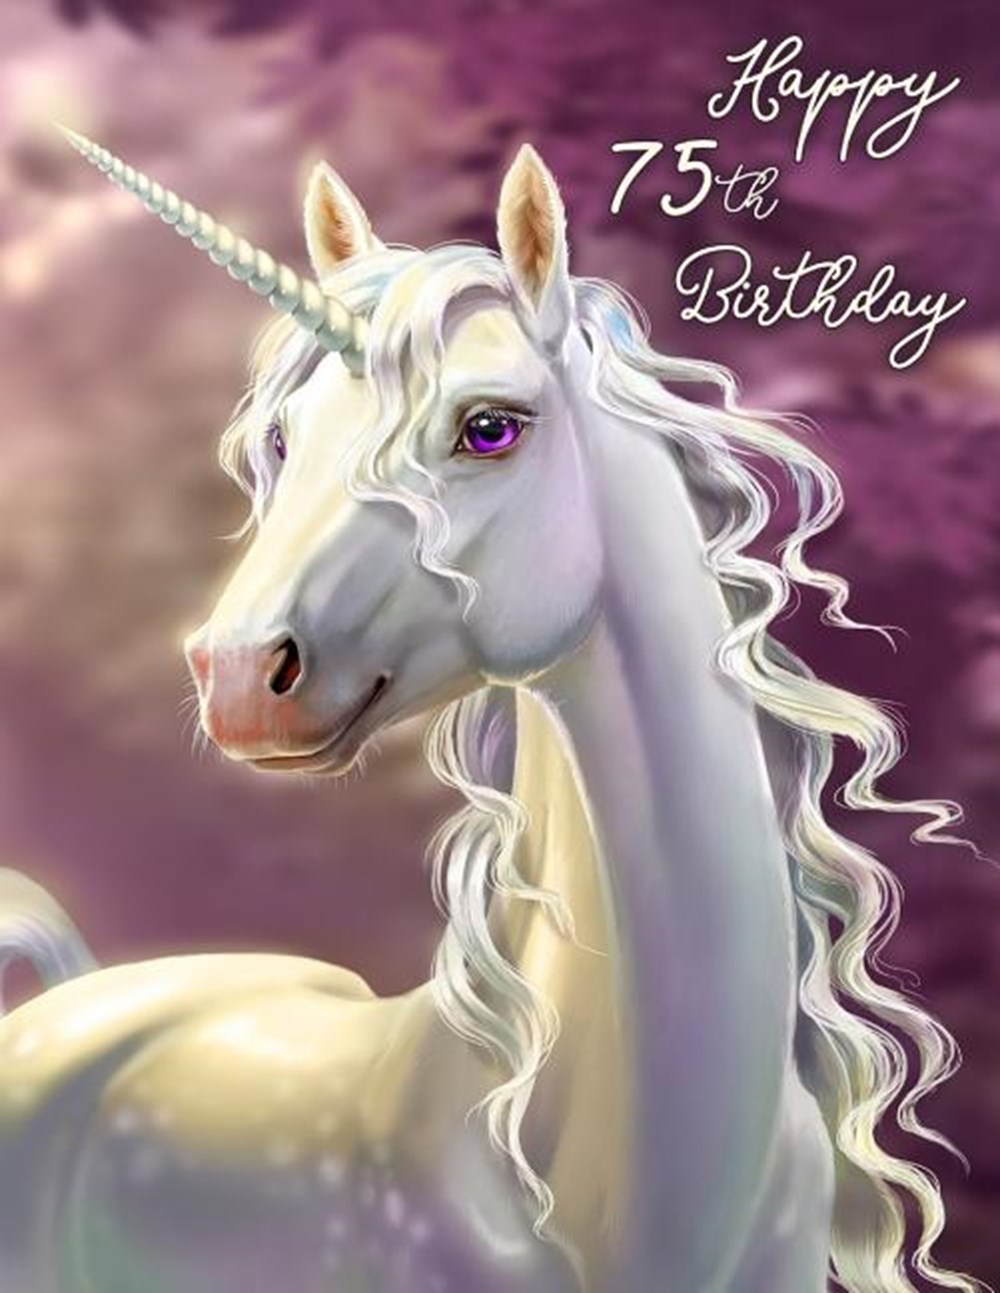 Happy 75th Birthday Large Print Address Book with Pretty Unicorn Design. Forget the Birthday Card an